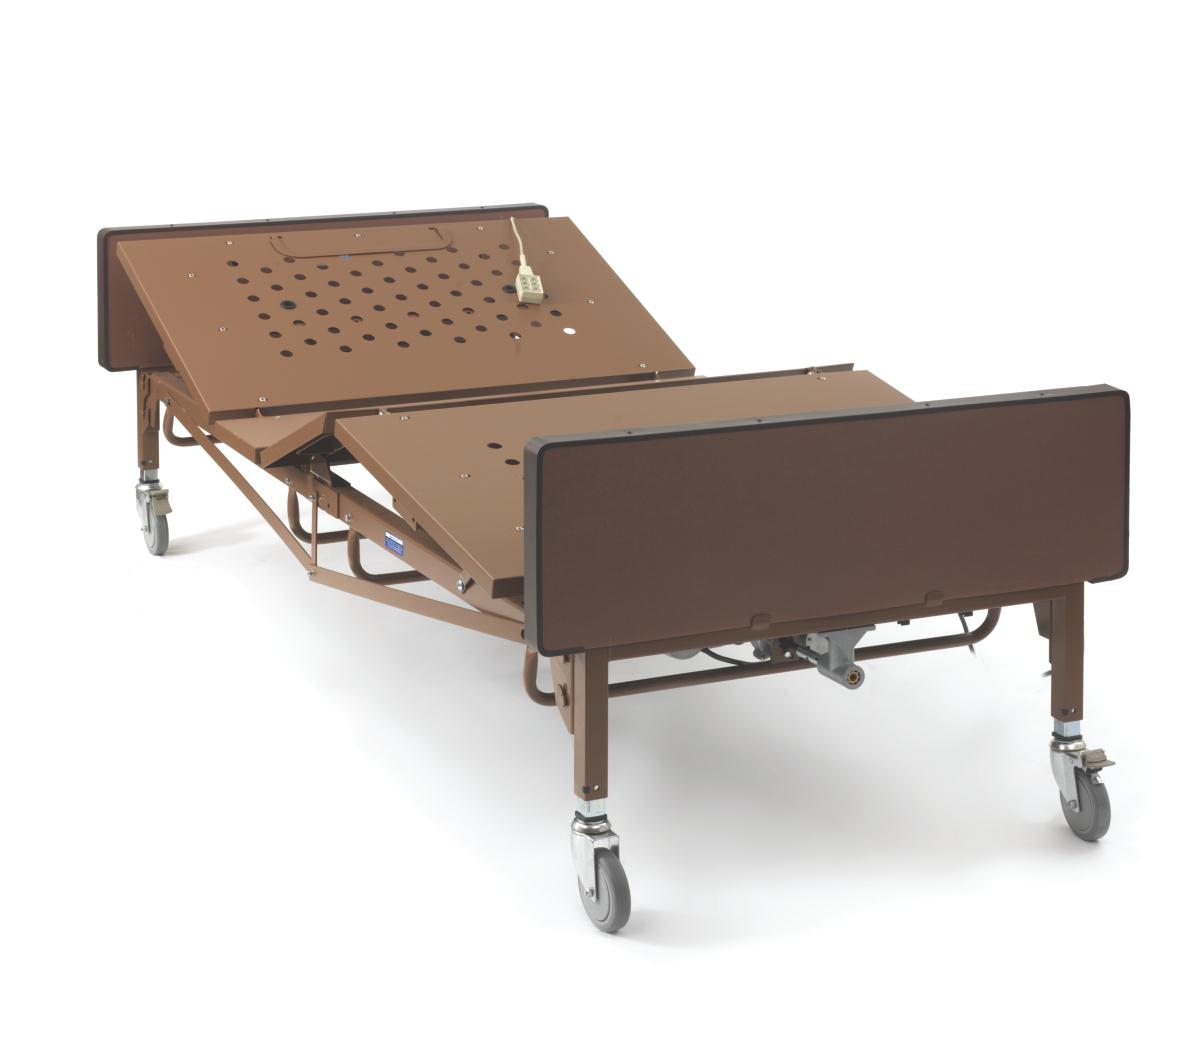 36" | 42" | 48" | 54" | 60" Wide extra hospital bed width